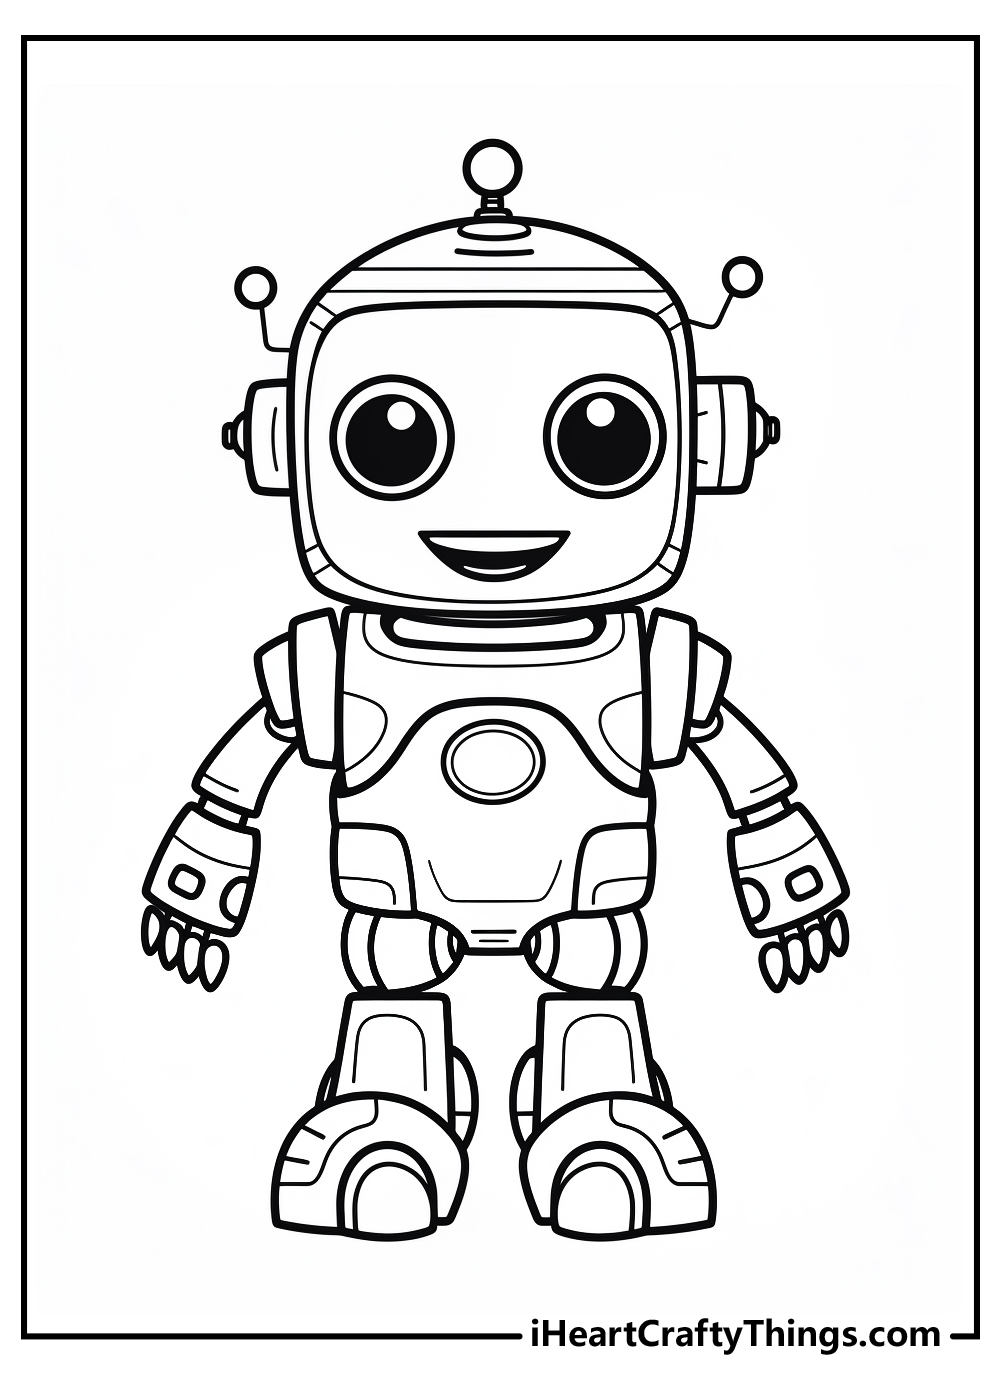 Fantastic Robot Coloring Book For Kids Ages 5-7: Explore, Fun With Learn  And Grow, Robot Coloring Book For Kids (A Really Best Relaxing Colouring  Book  Ages 2-4, 4-8, 9-12) Science Gift